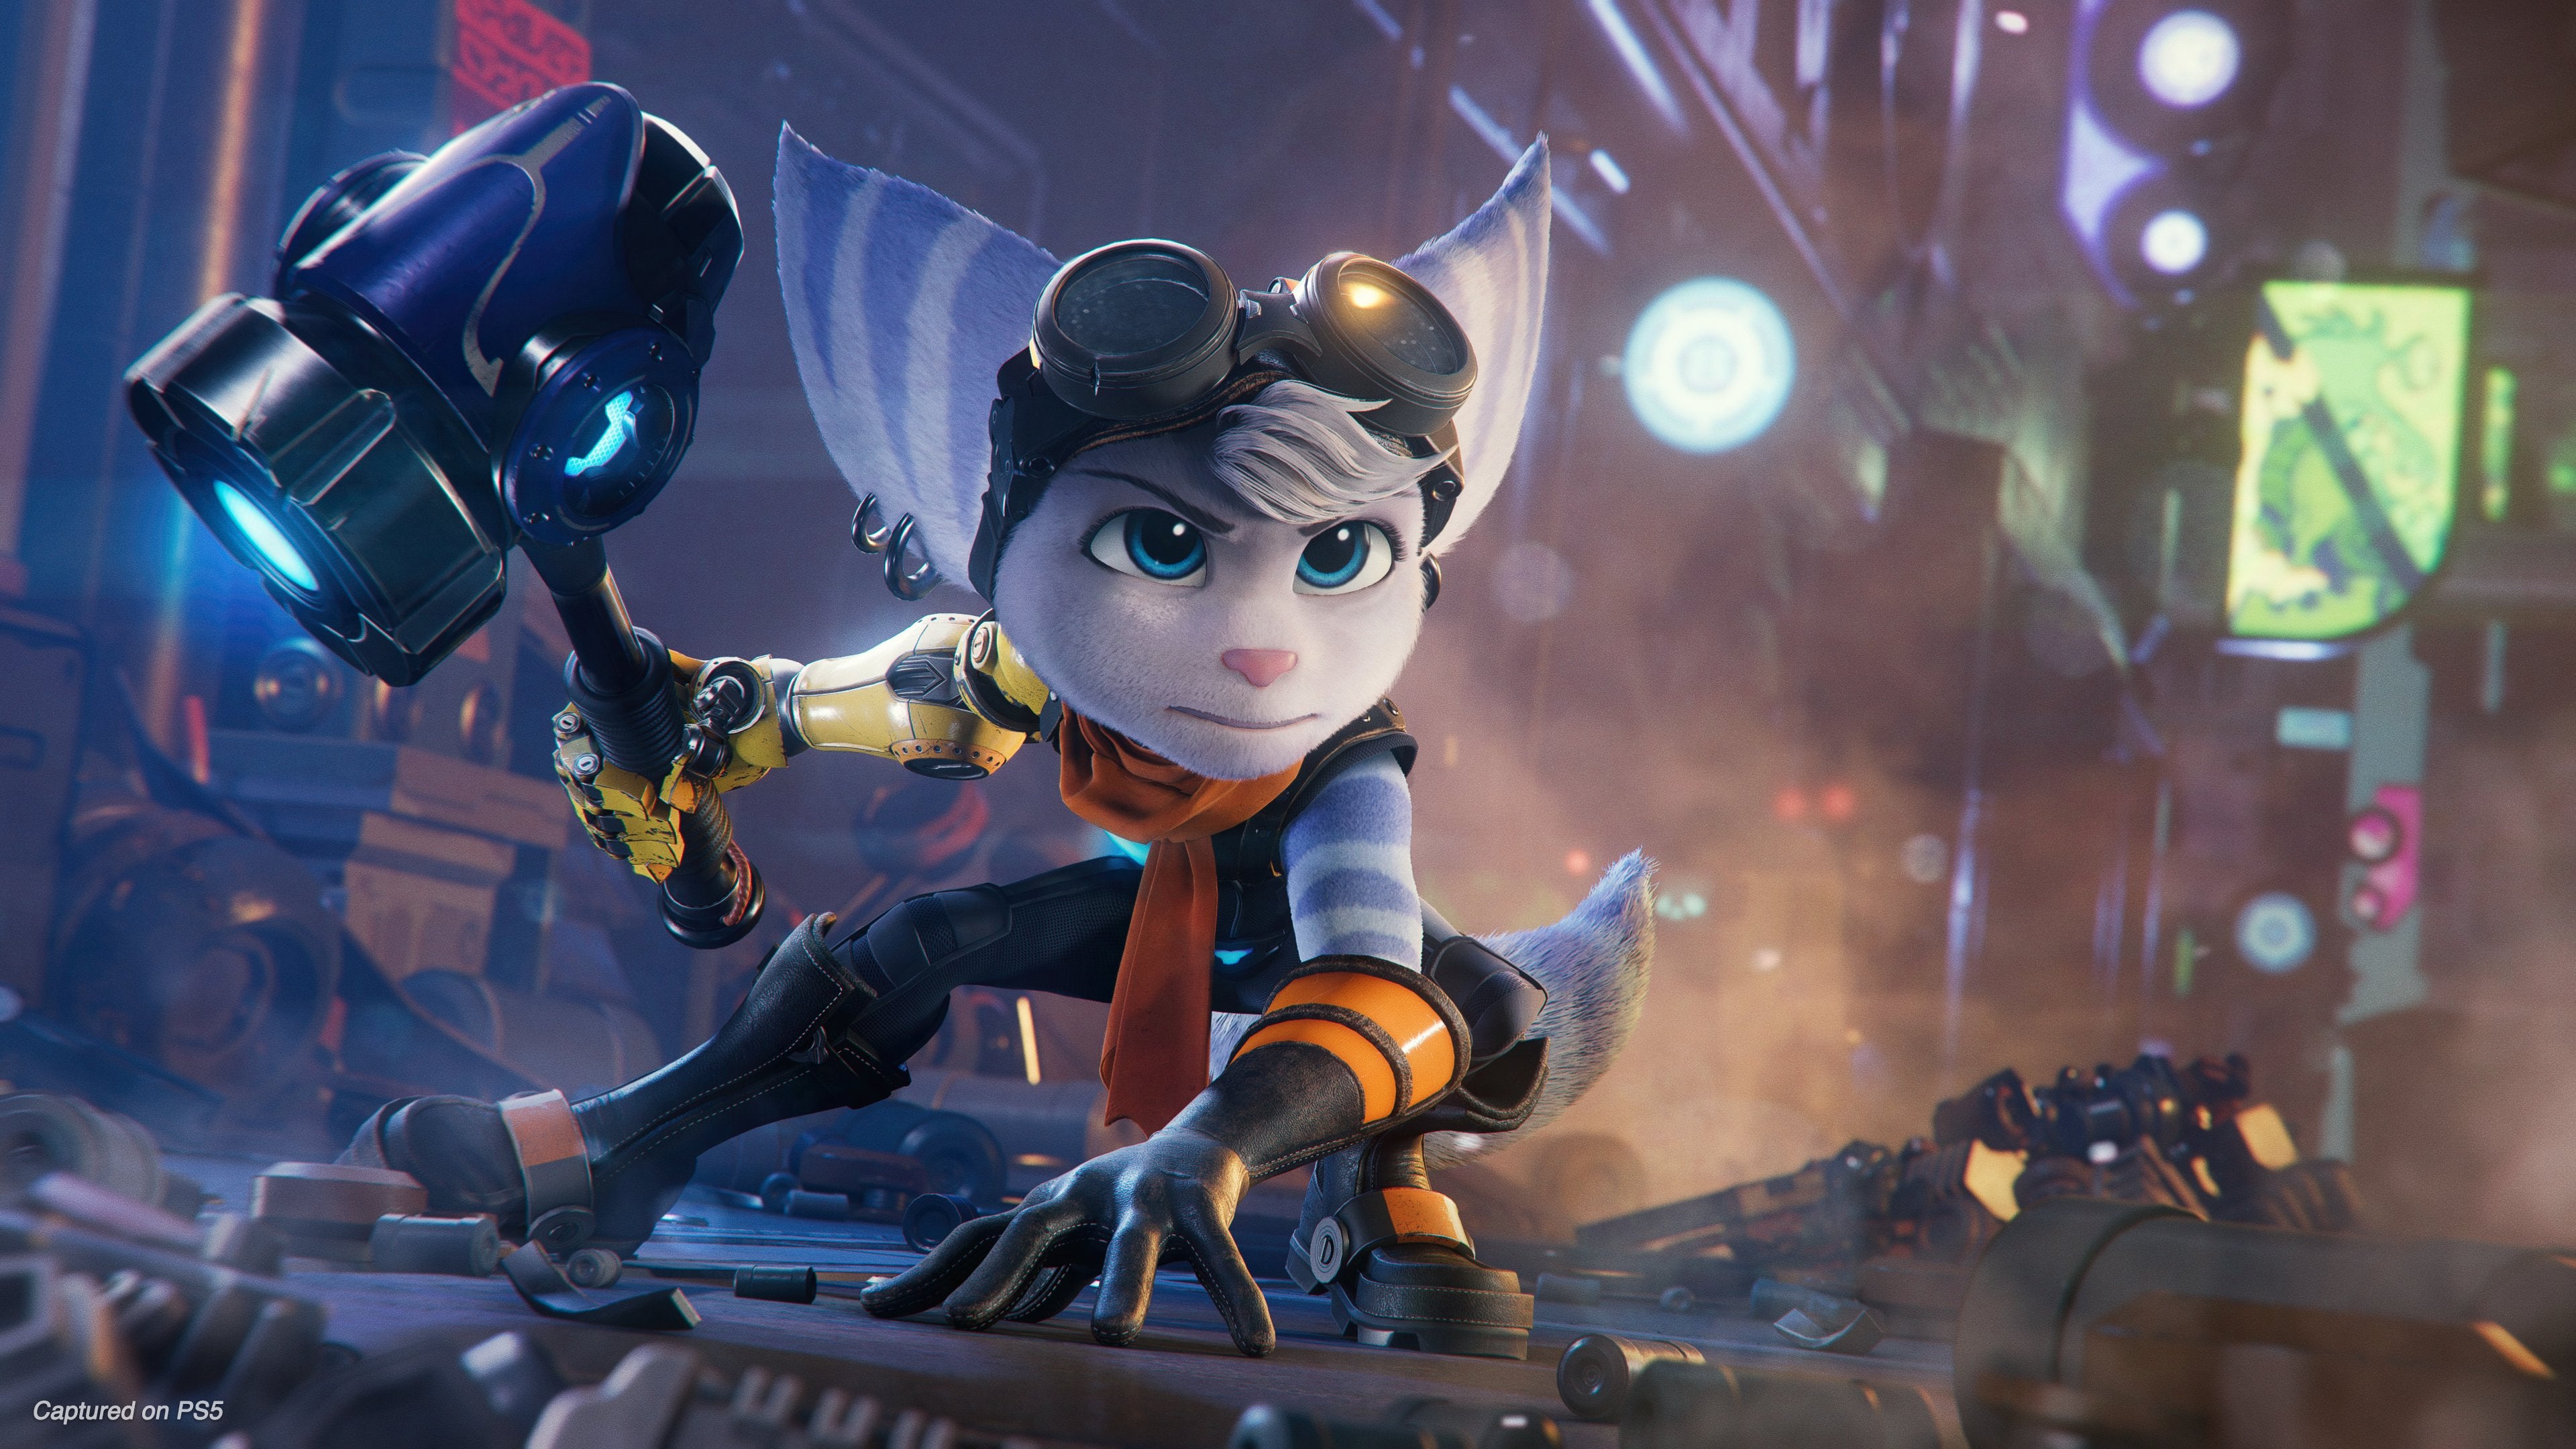 Image for PS5 exclusive Ratchet & Clank: Rift Apart arrives in June